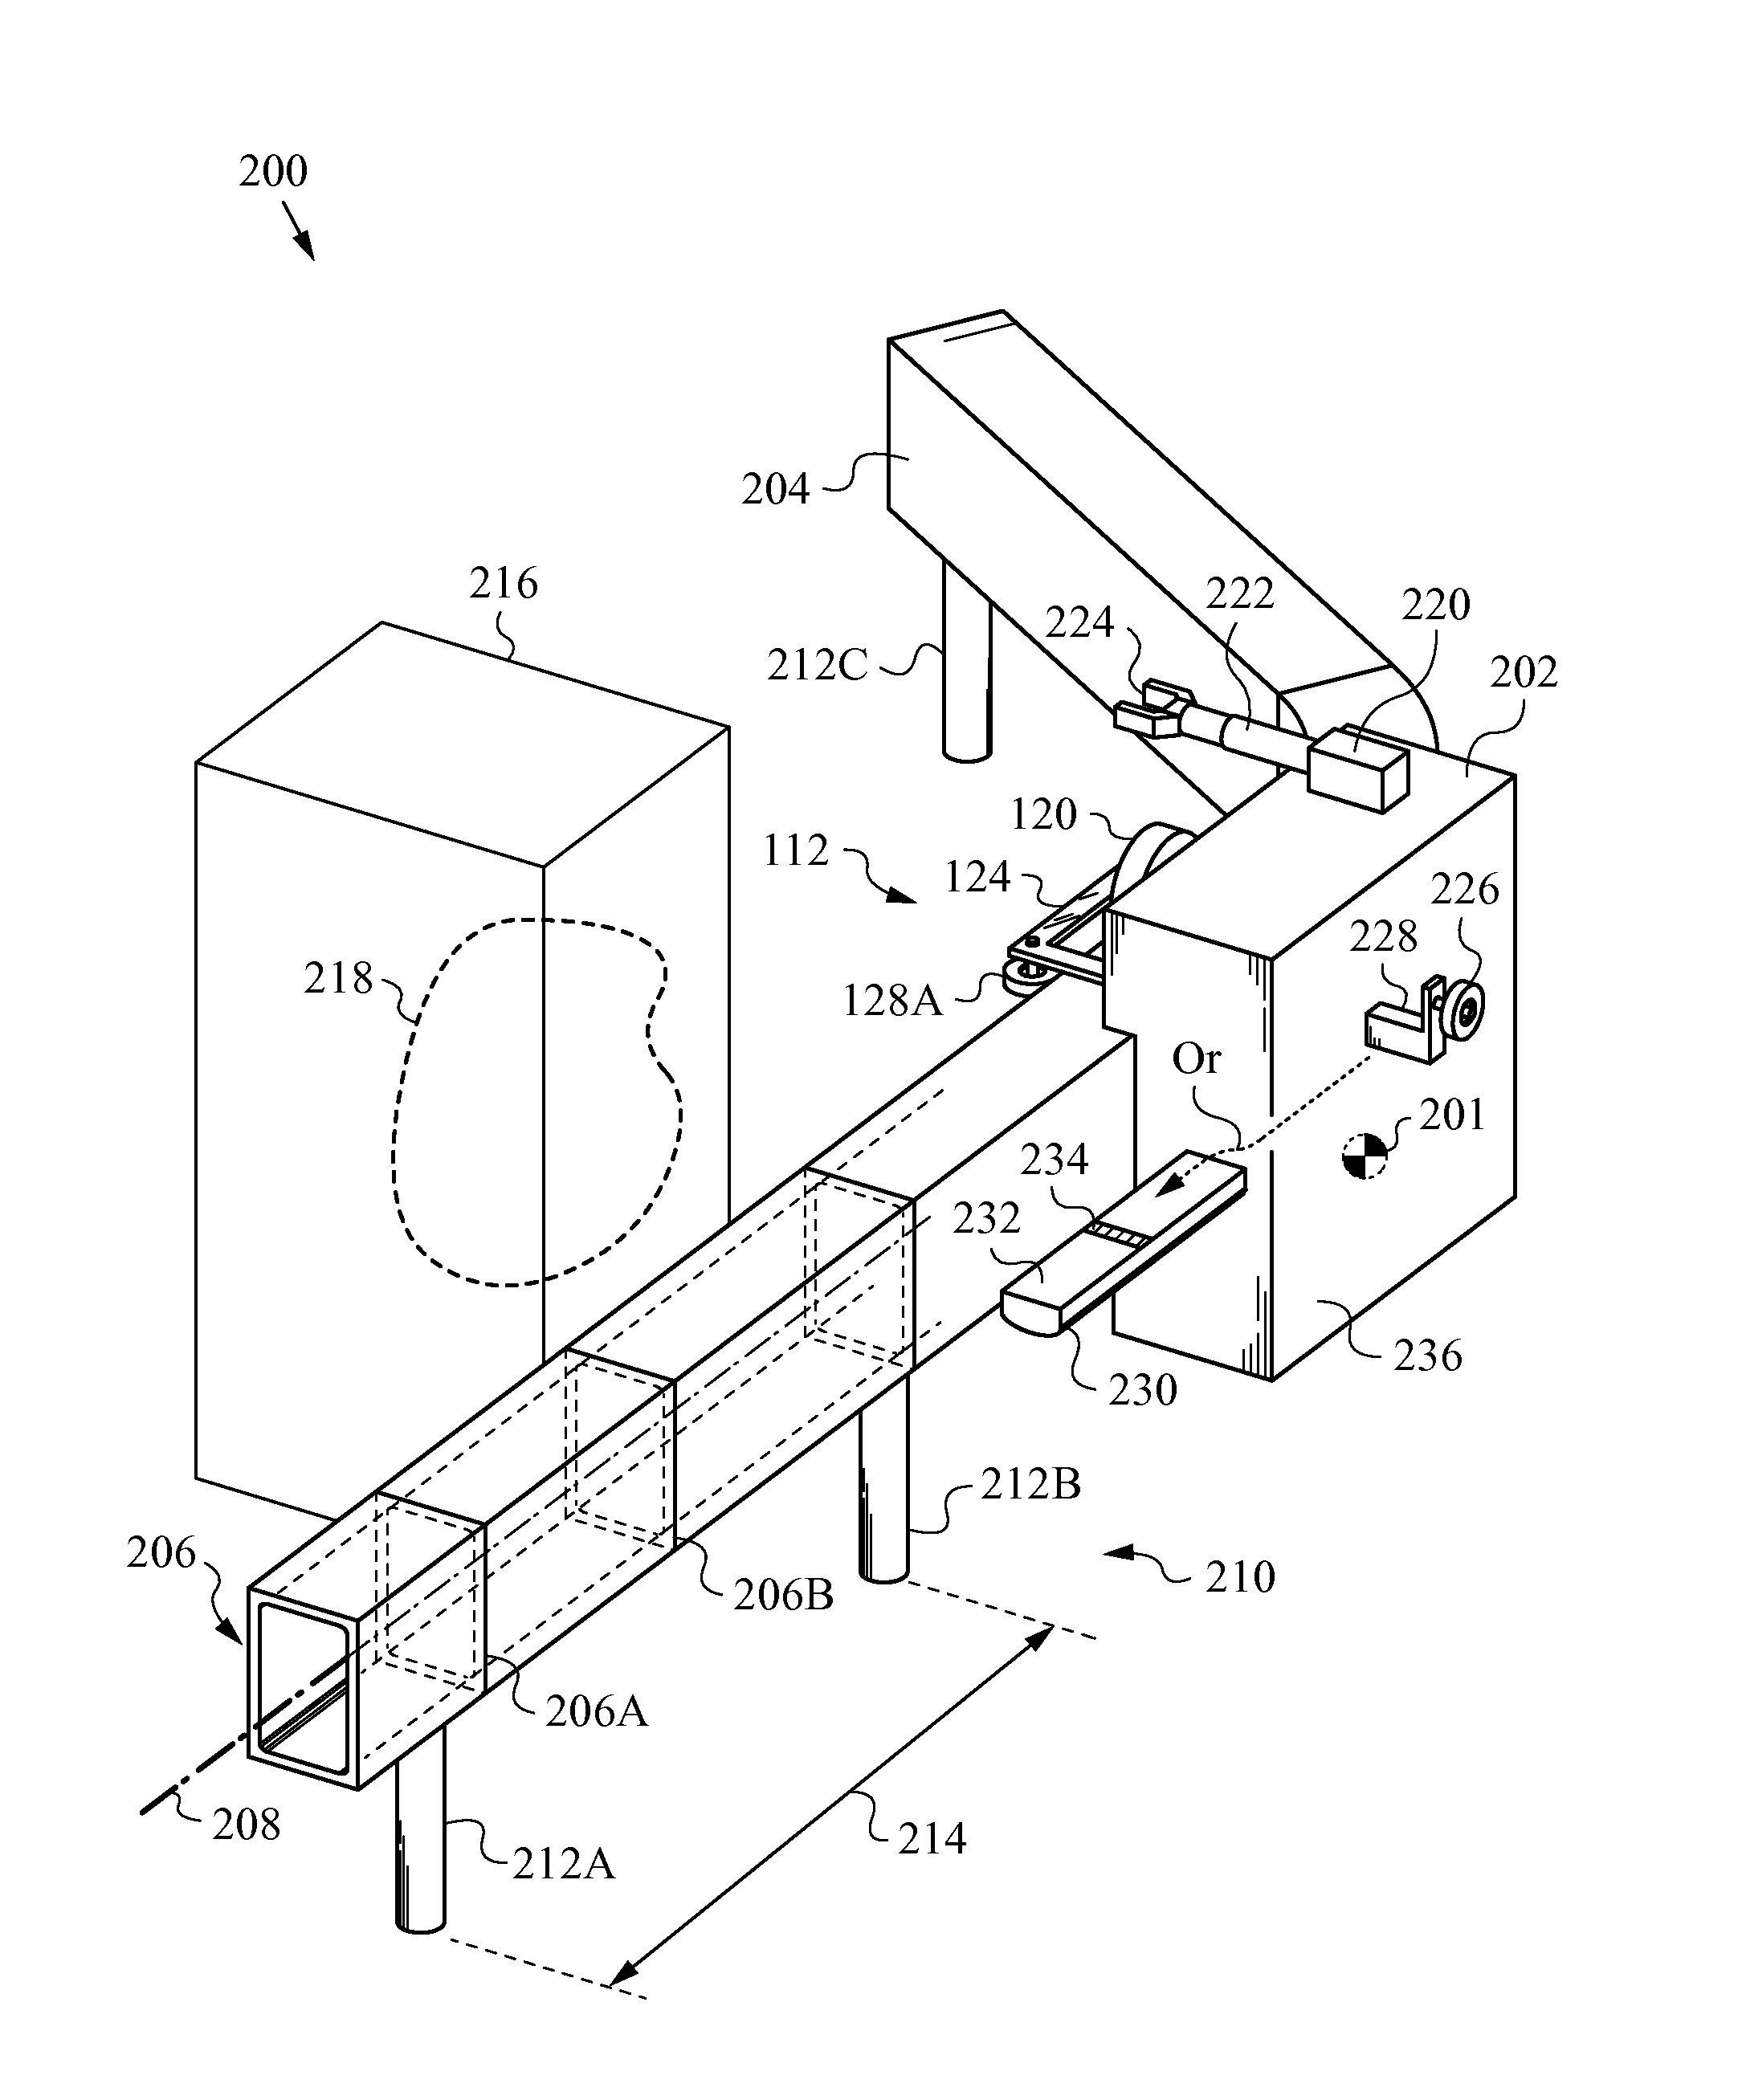 Monorail vehicle apparatus with trucks designed to accommodate movement along curved rail sections